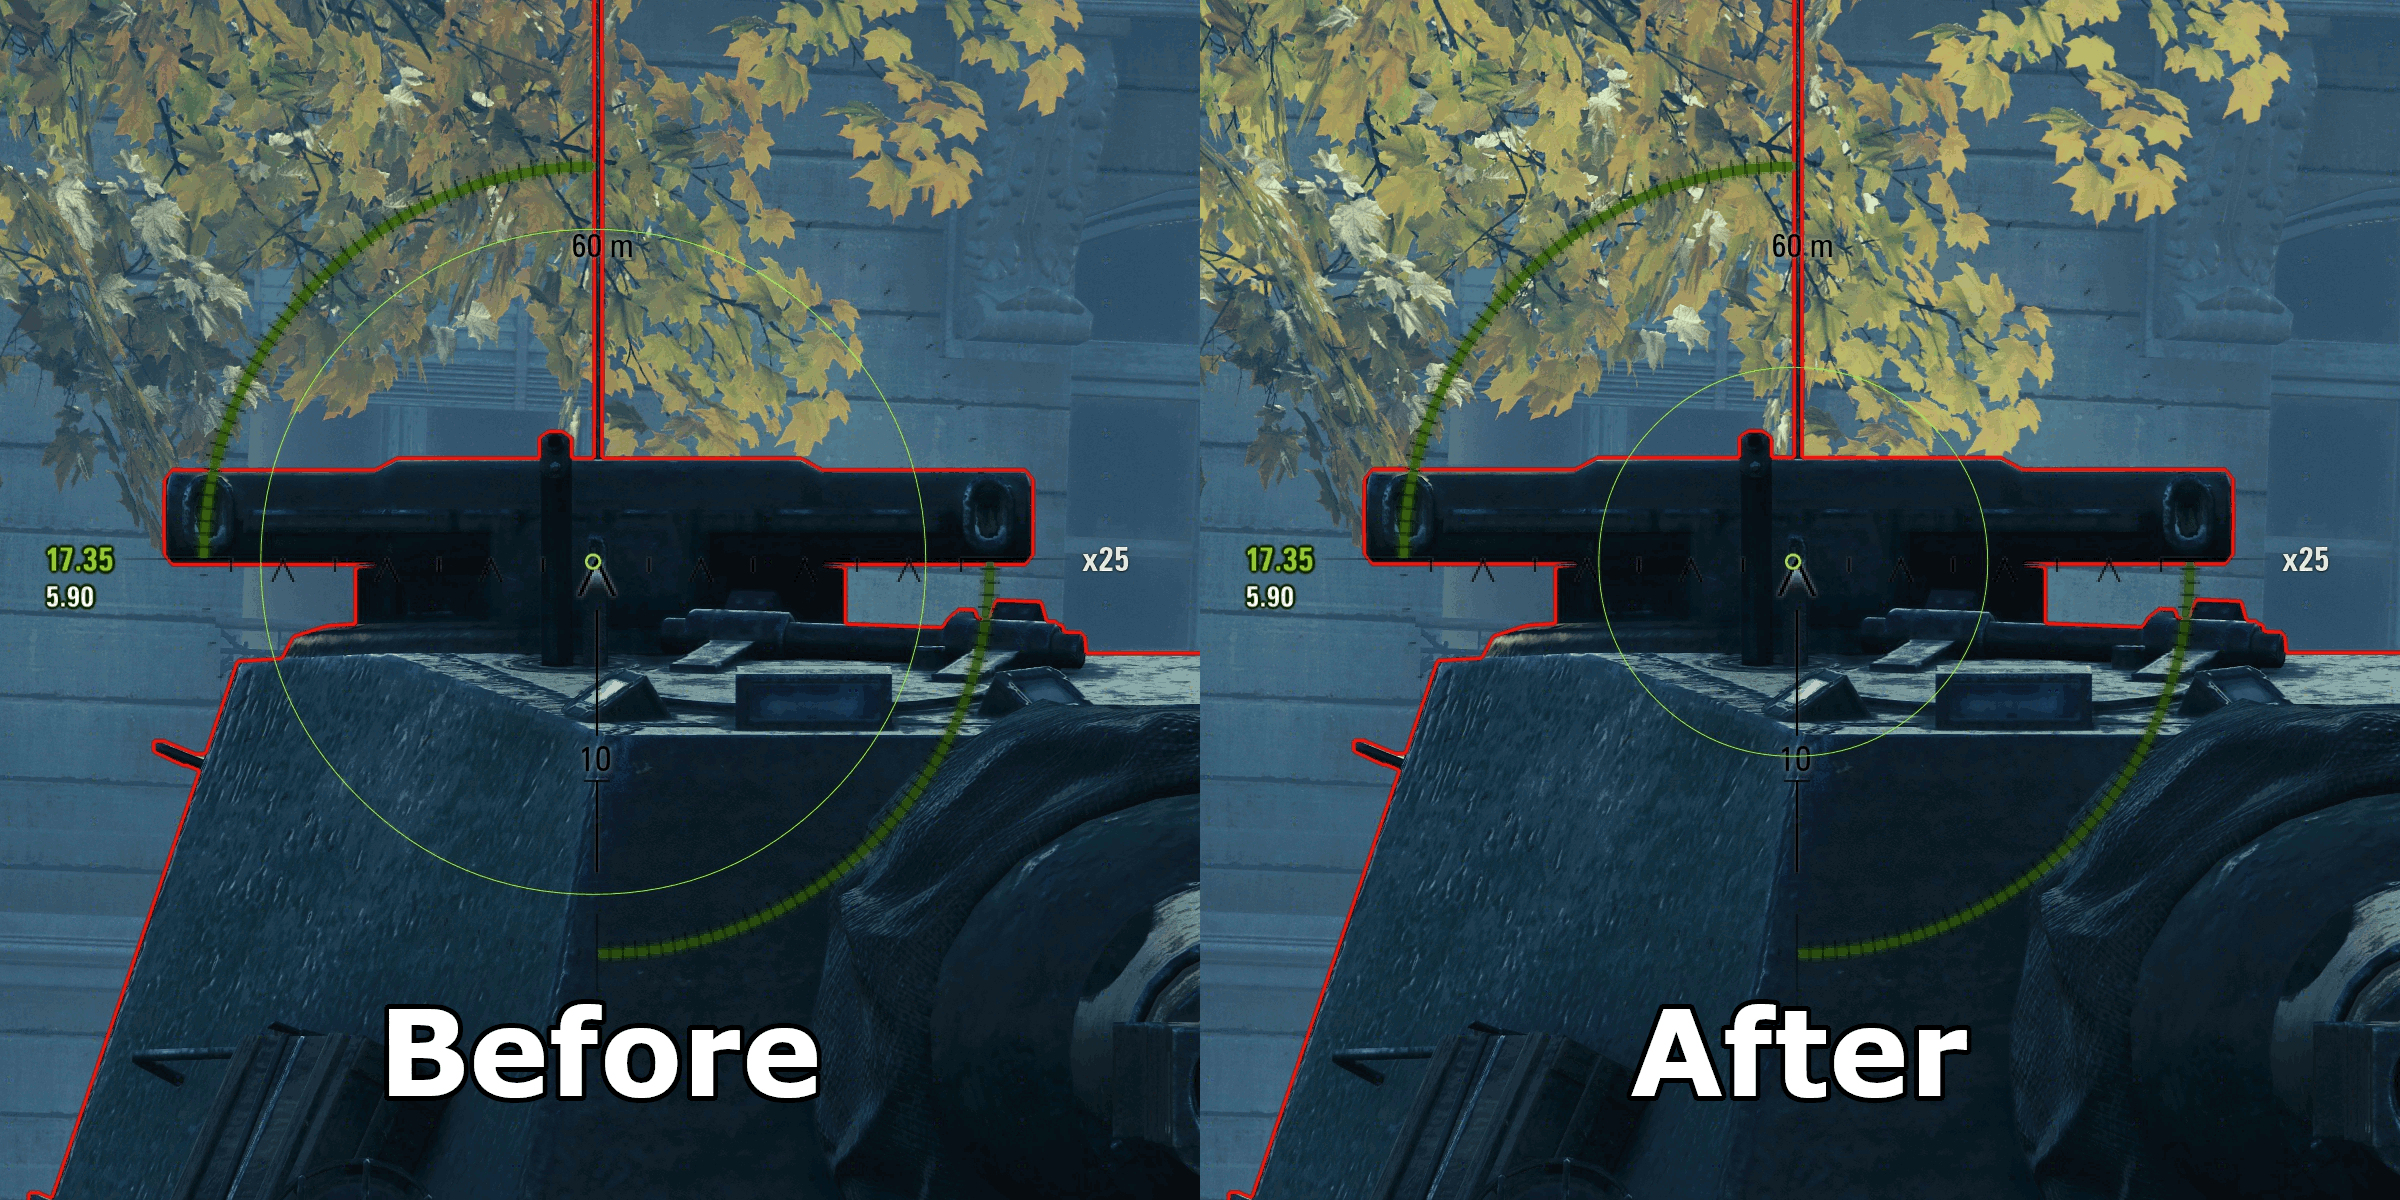 Fix Reticle Size By Jak_Atackka (RDDT Warpack) 5562c8bf-d70a-47bc-99e2-1f25e15ad13f